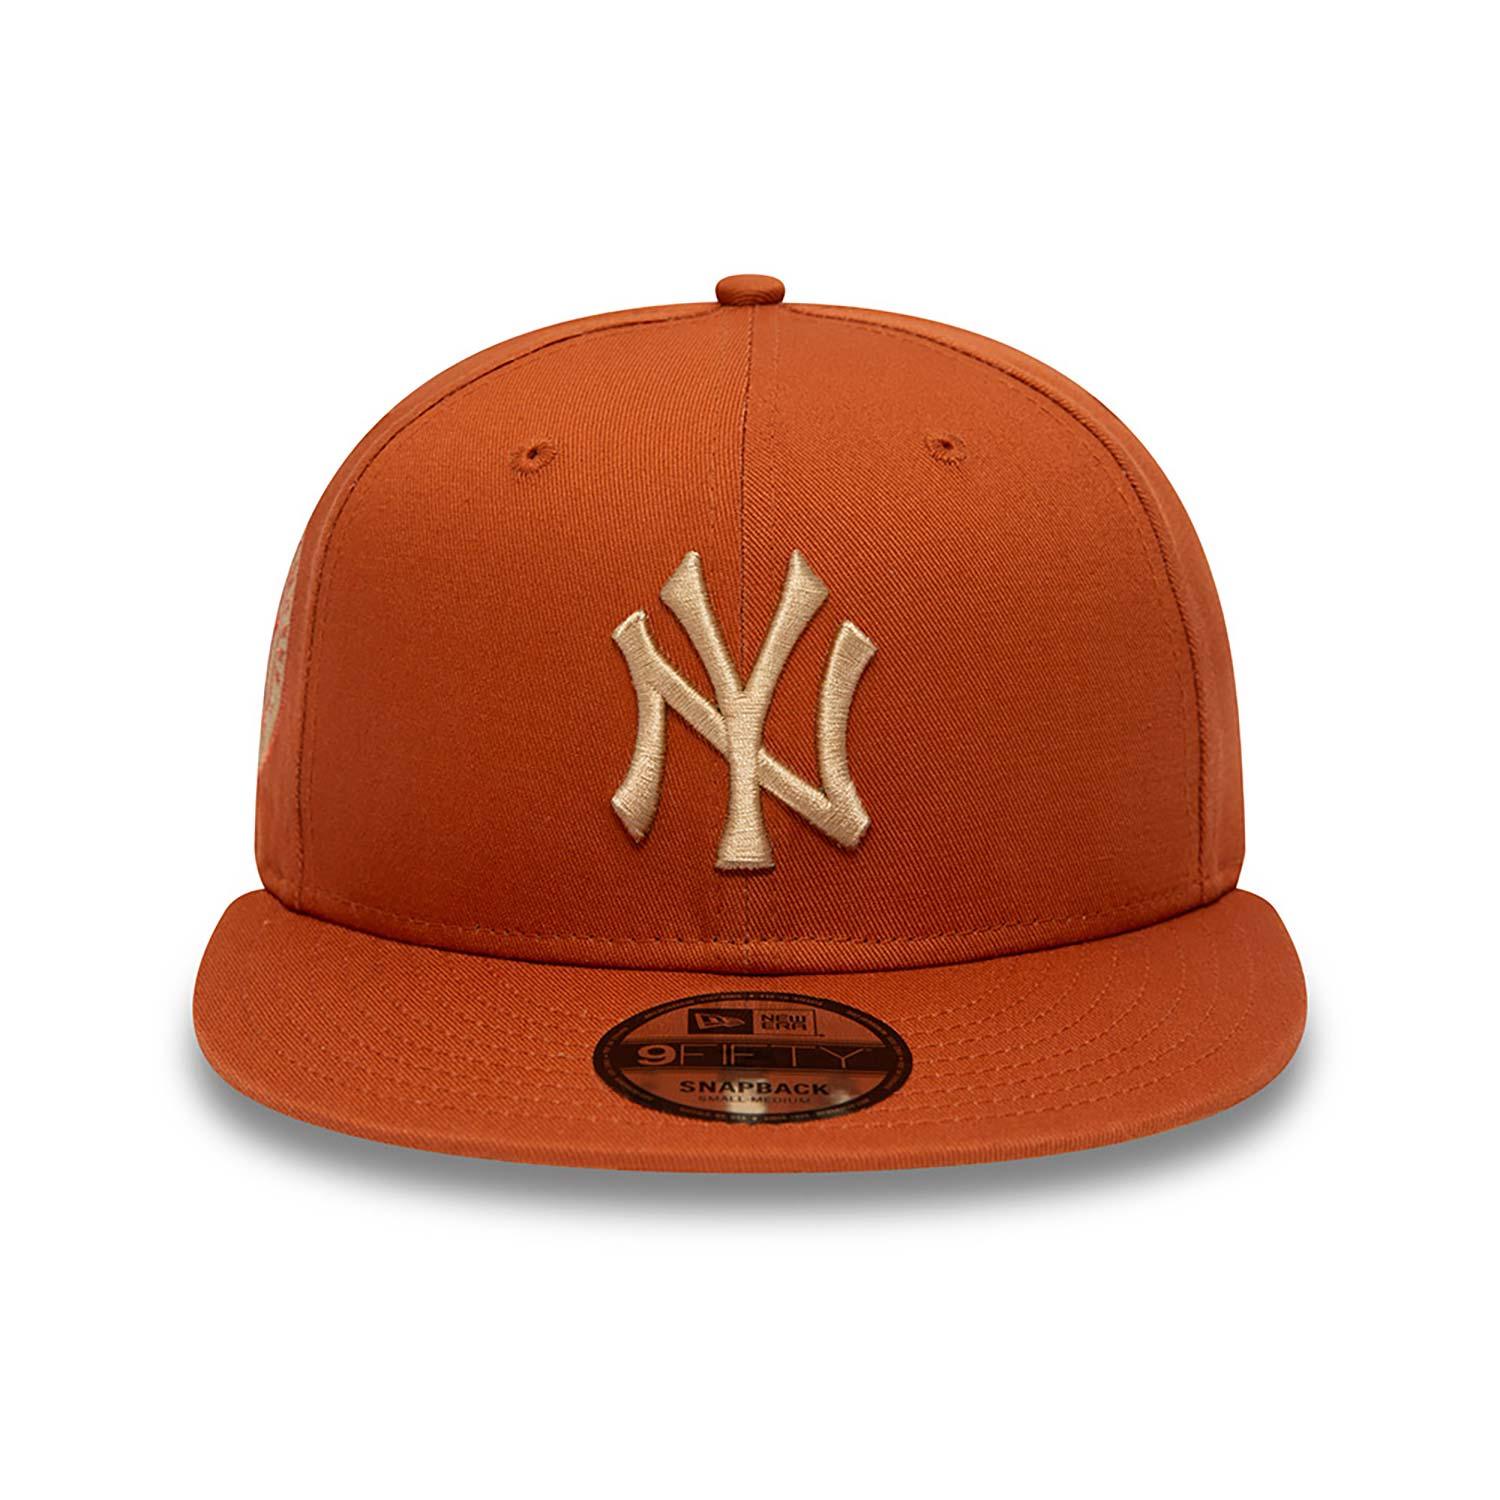 NEW ERA 9FIFTY SIDE PATCH NEW YORK YANKEES RUST SNAPBACK - FAM